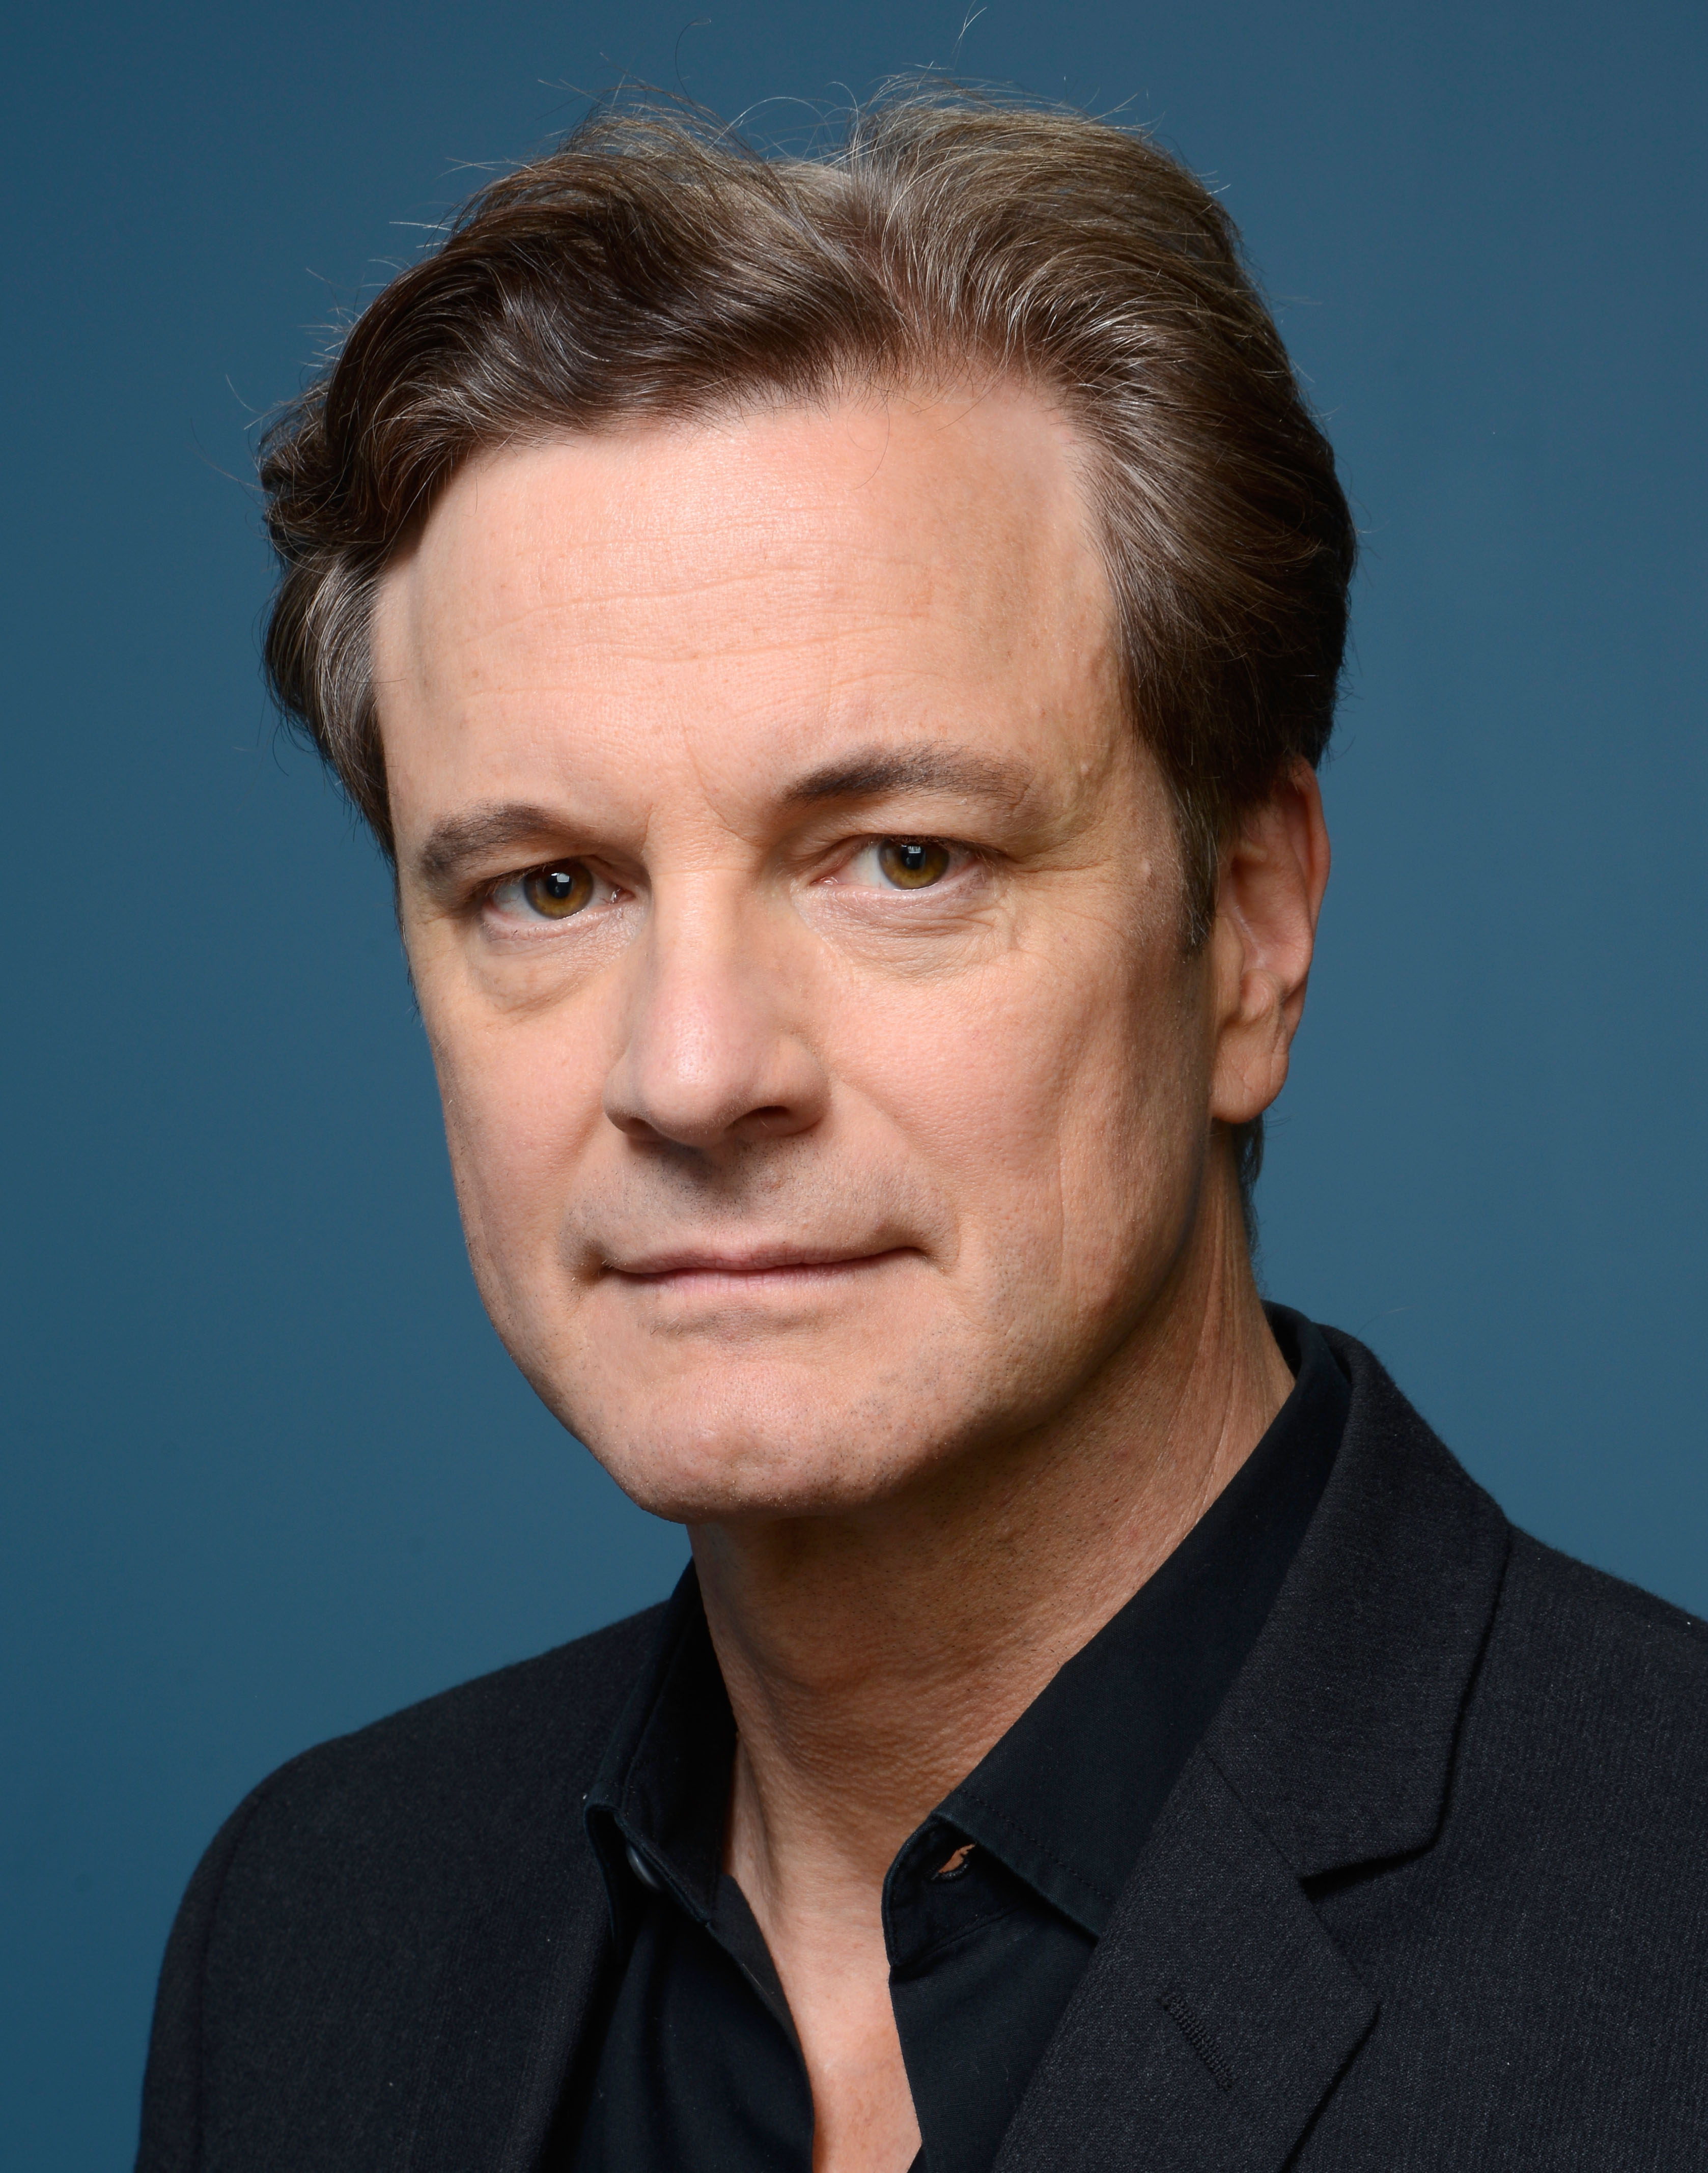 HQ Colin Firth Wallpapers | File 1353.83Kb